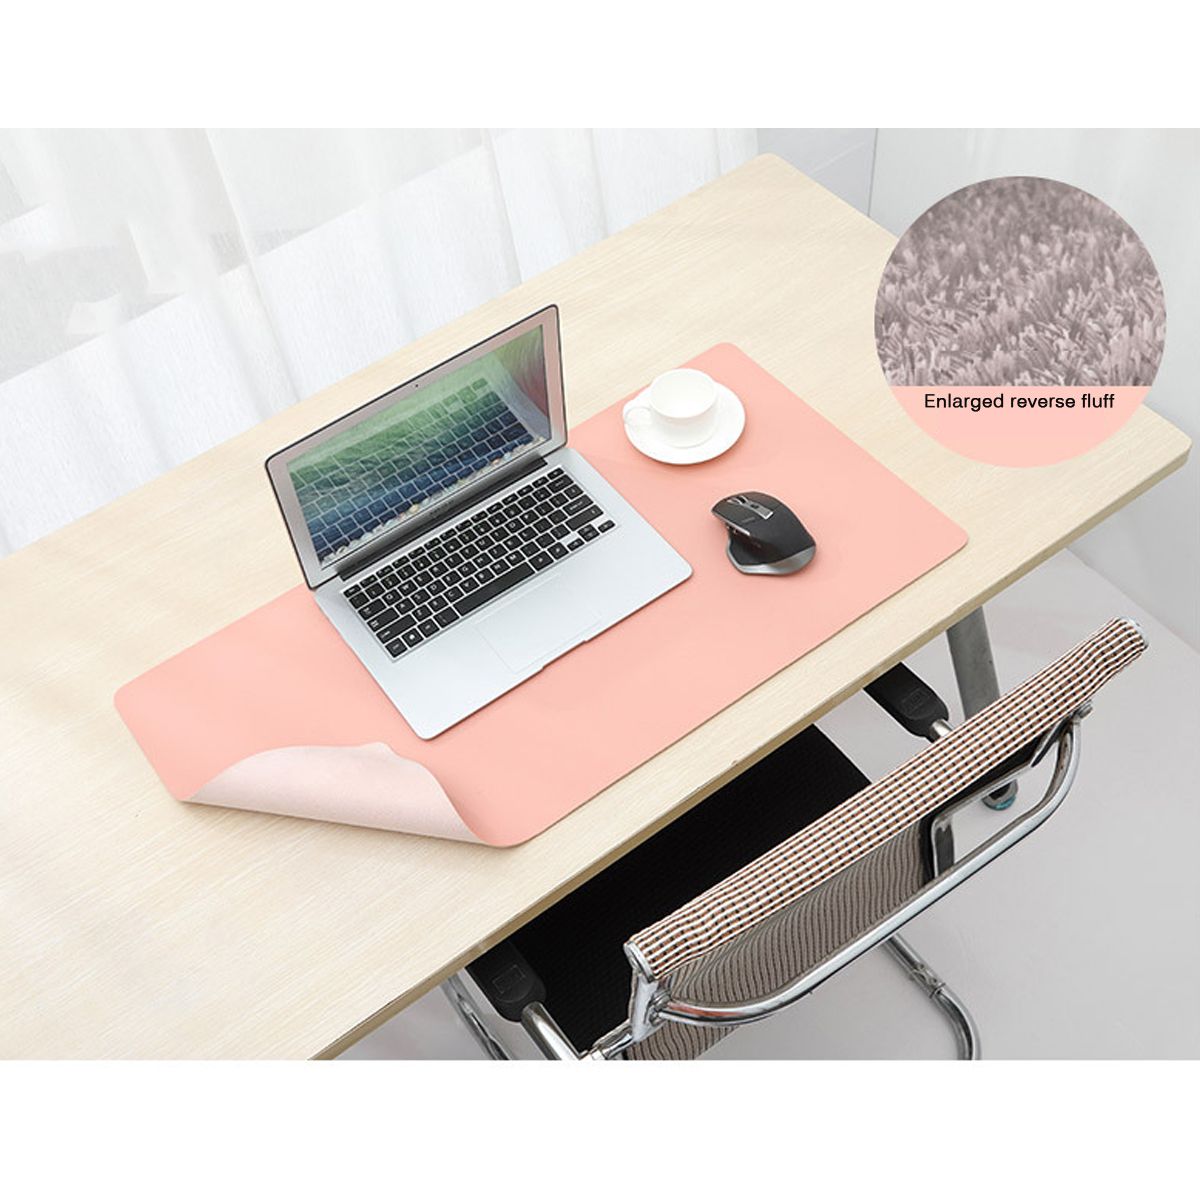 Waterproof-Mouse-Pad-Large-Office-Gaming-Desk-Mat-PU-Leather-Multifunctional-PVC-Pad-for-Laptop-Mous-1745560